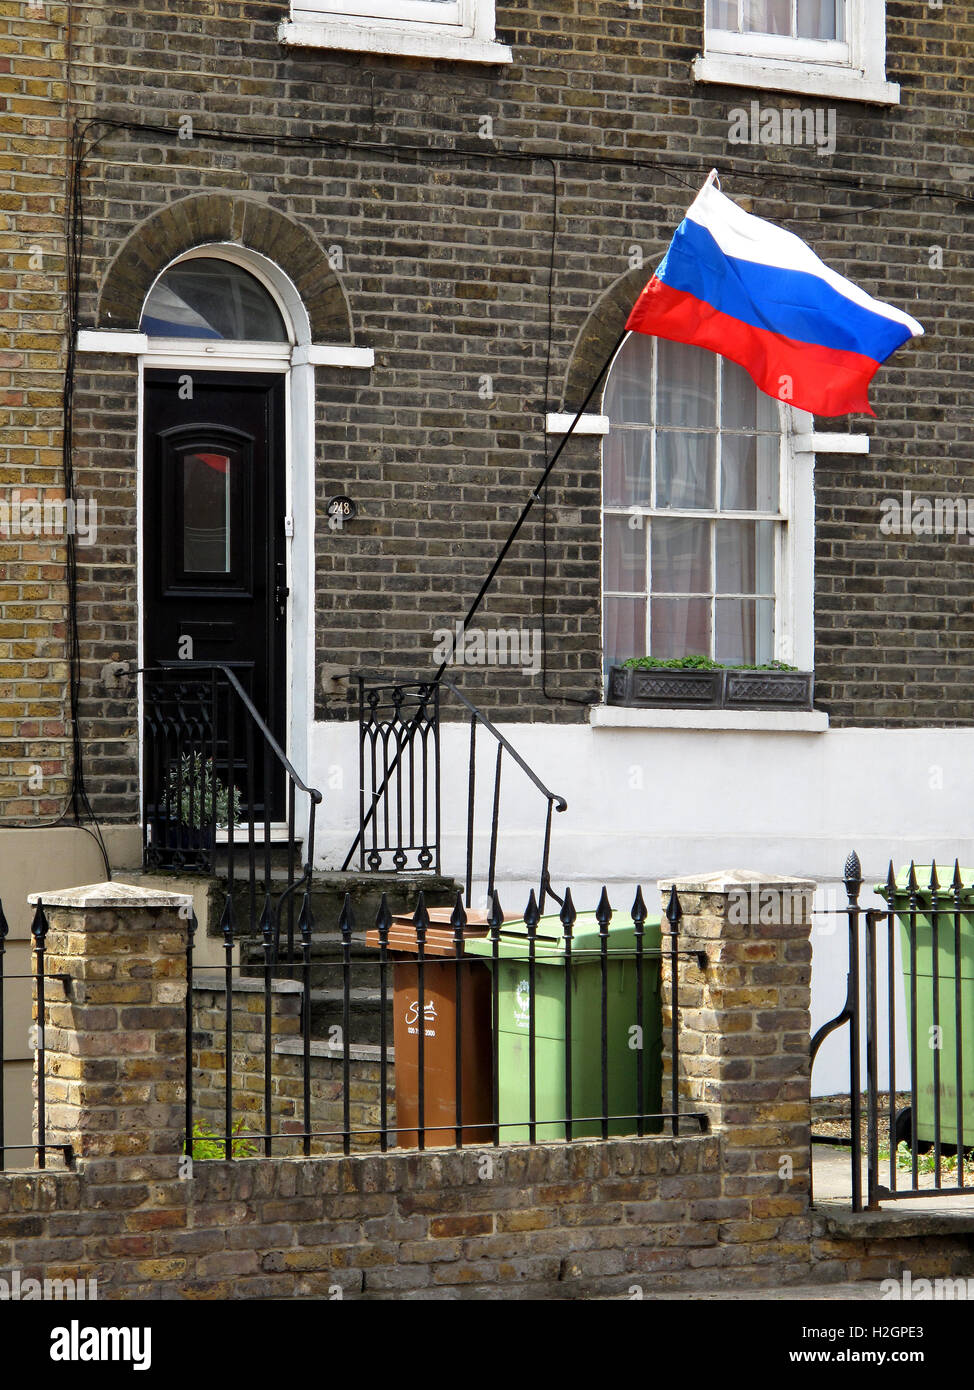 A Russian flag flies outside a house entrance in south east London, UK. Stock Photo